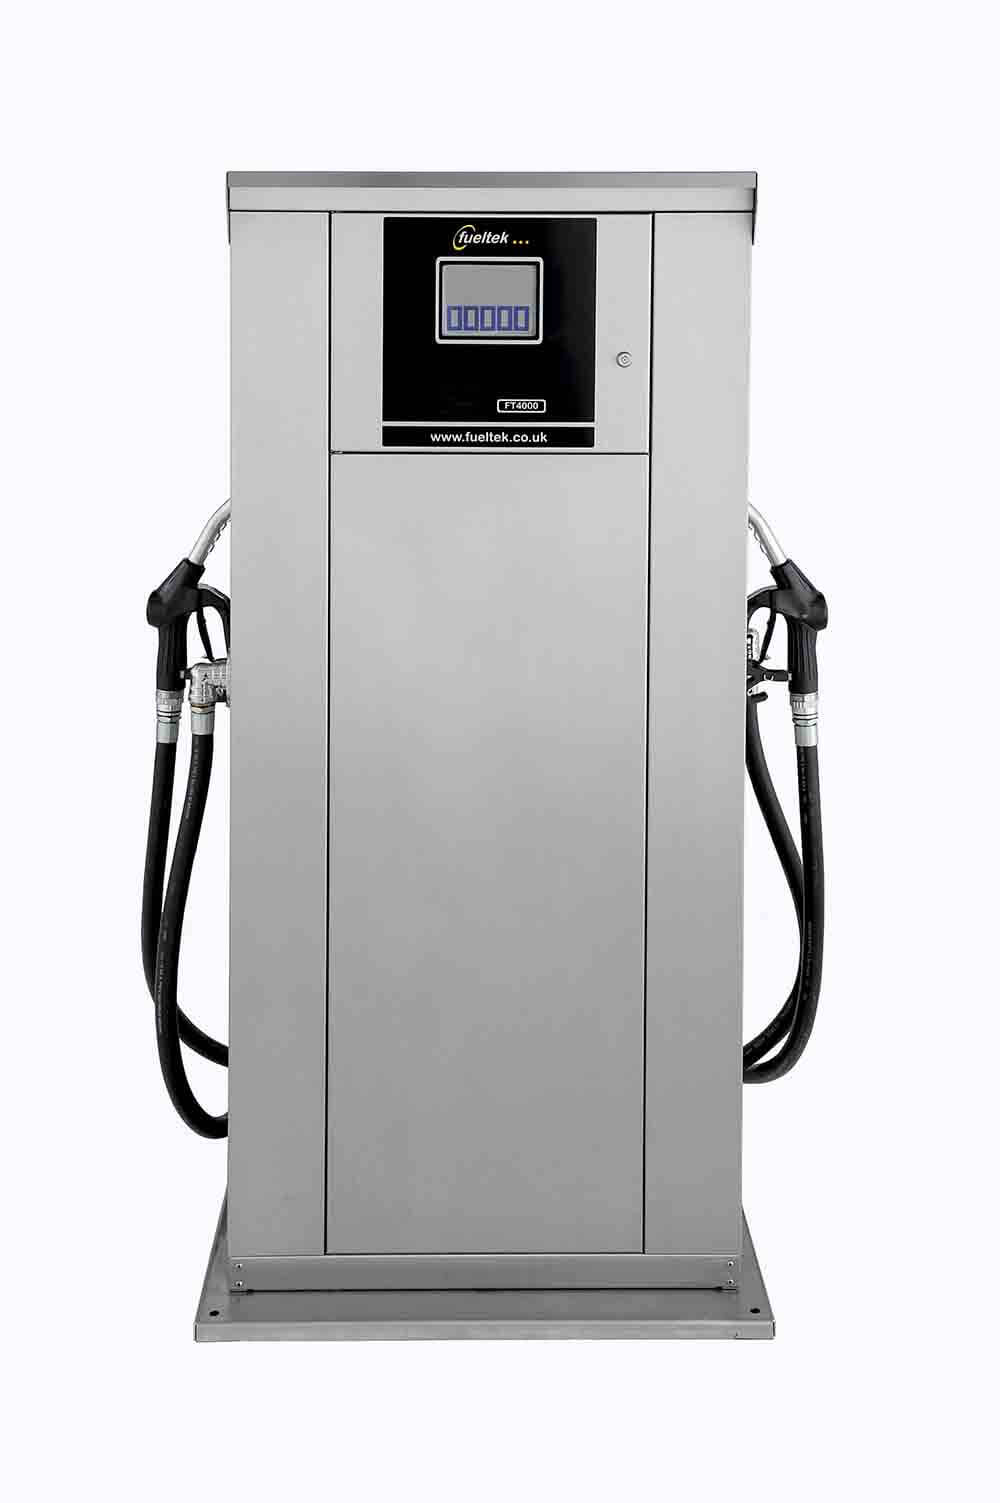 Designers of Pulsed Output Fuel Pump